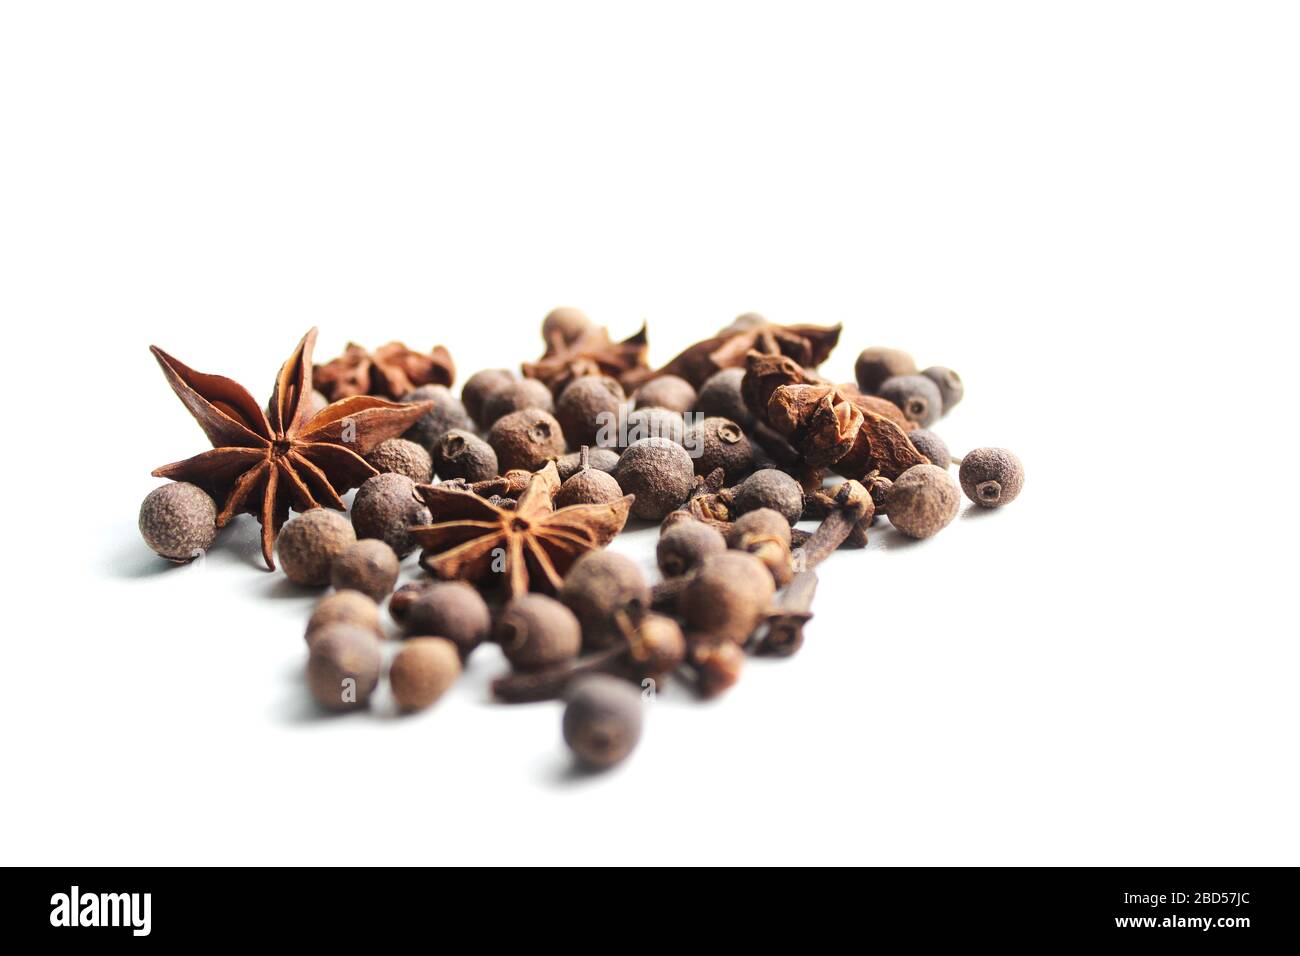 On white background - anise, black pepper, allspice. Healthy eating concept. Background to insert text or spice catalog. Diet Stock Photo